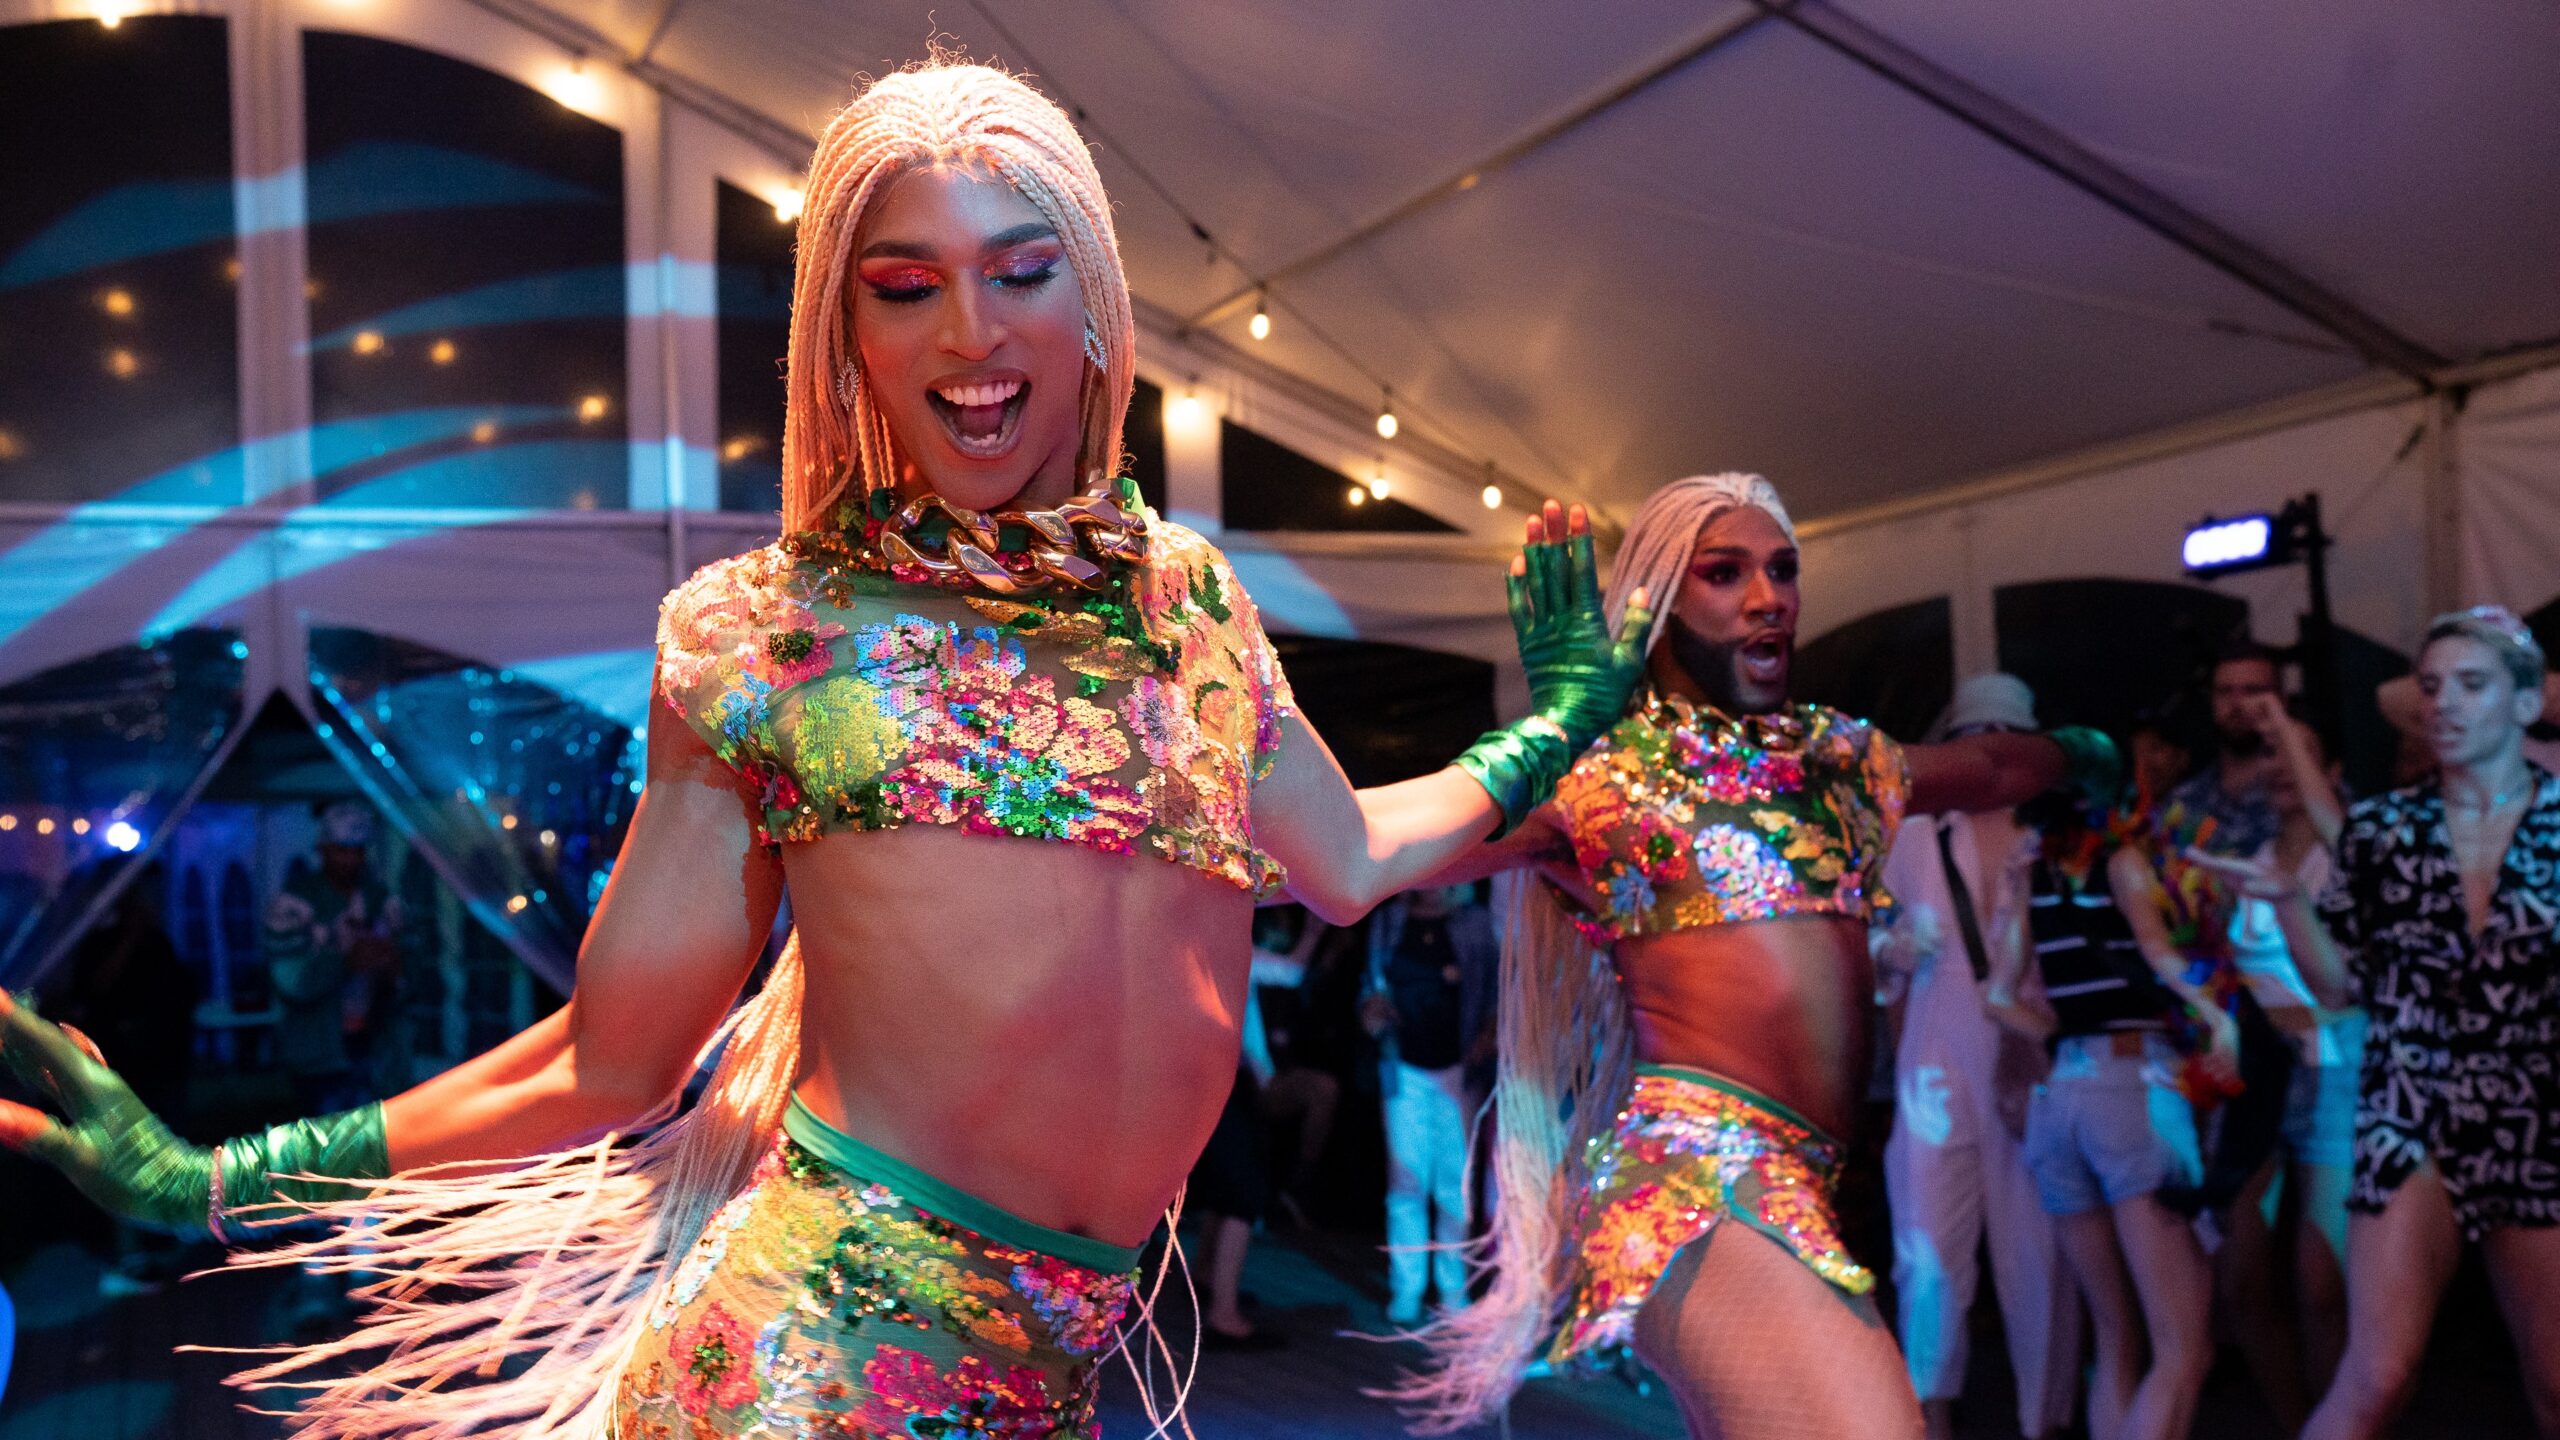 The Dragon Sisters, a drag duo, appear in the middle of their dance at the Jacob's Pillow Pride Party. They are in a tent, and wearing glittery, multi-colored shirts and skirts, as well as long, blonde braids.